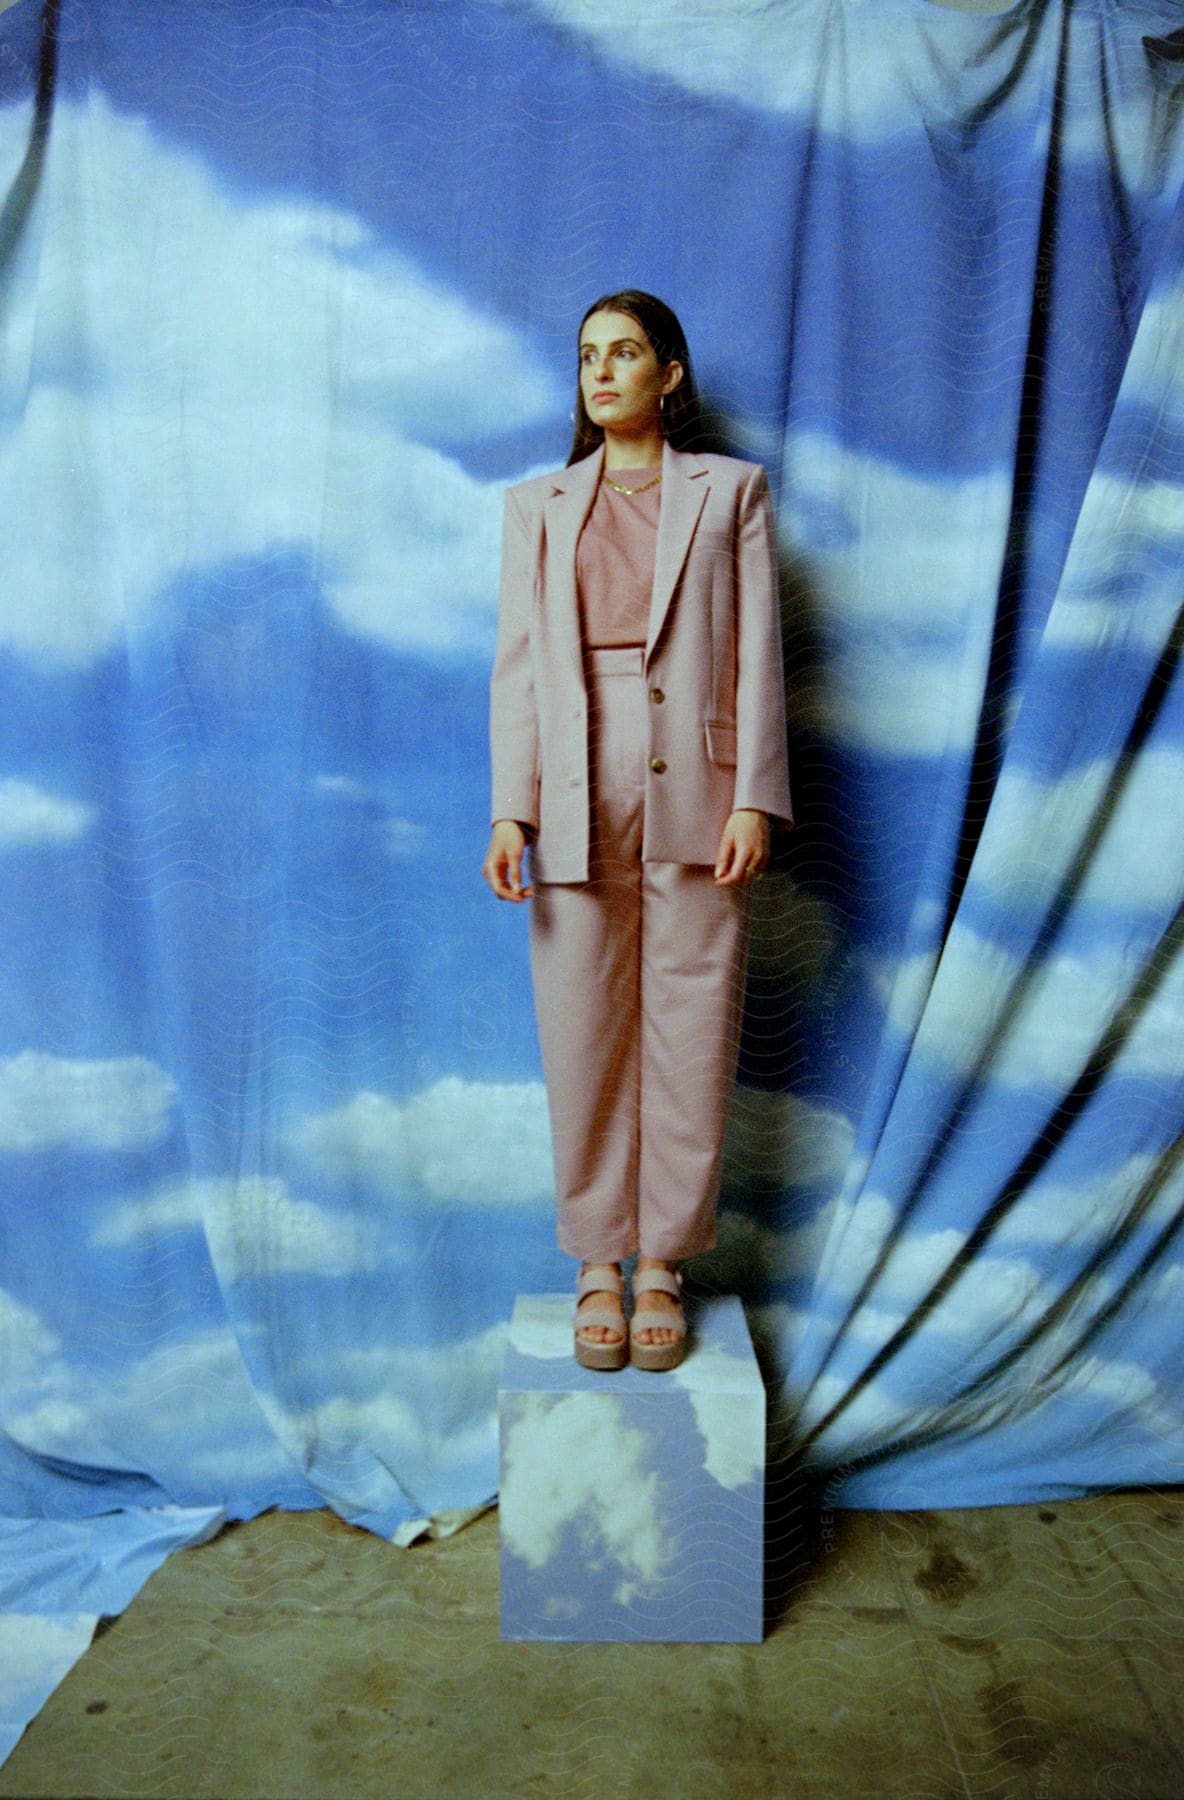 A woman with long dark hair wearing a pant suit is standing on a block in front of a sheet painted like the cloudy sky